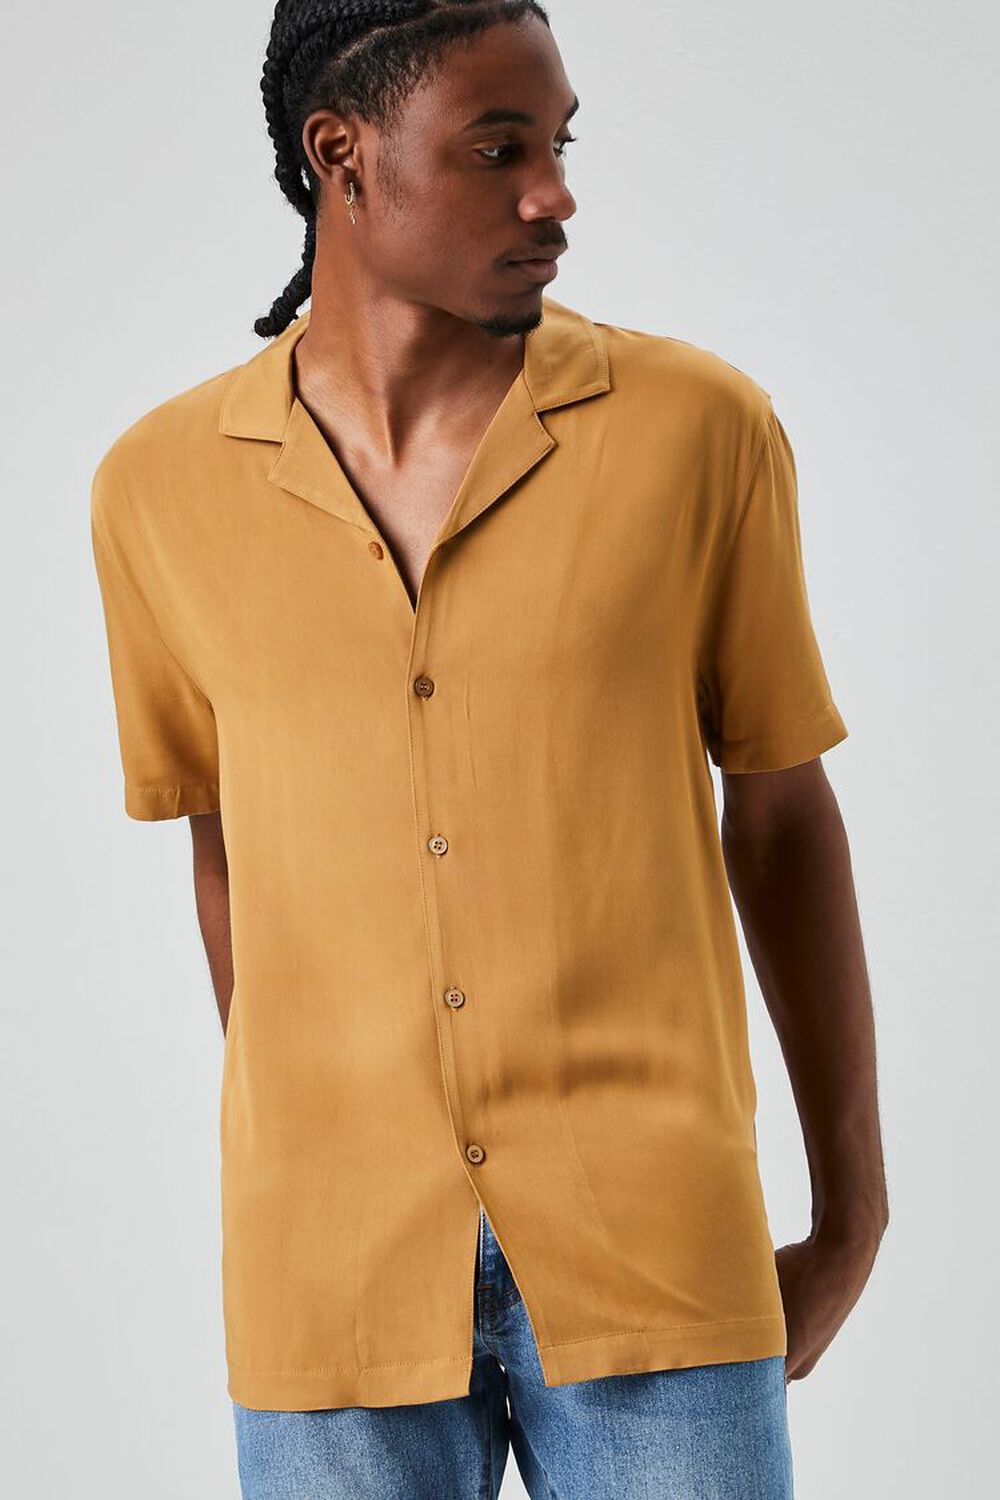 BROWN Drop-Sleeve Buttoned Shirt, image 1